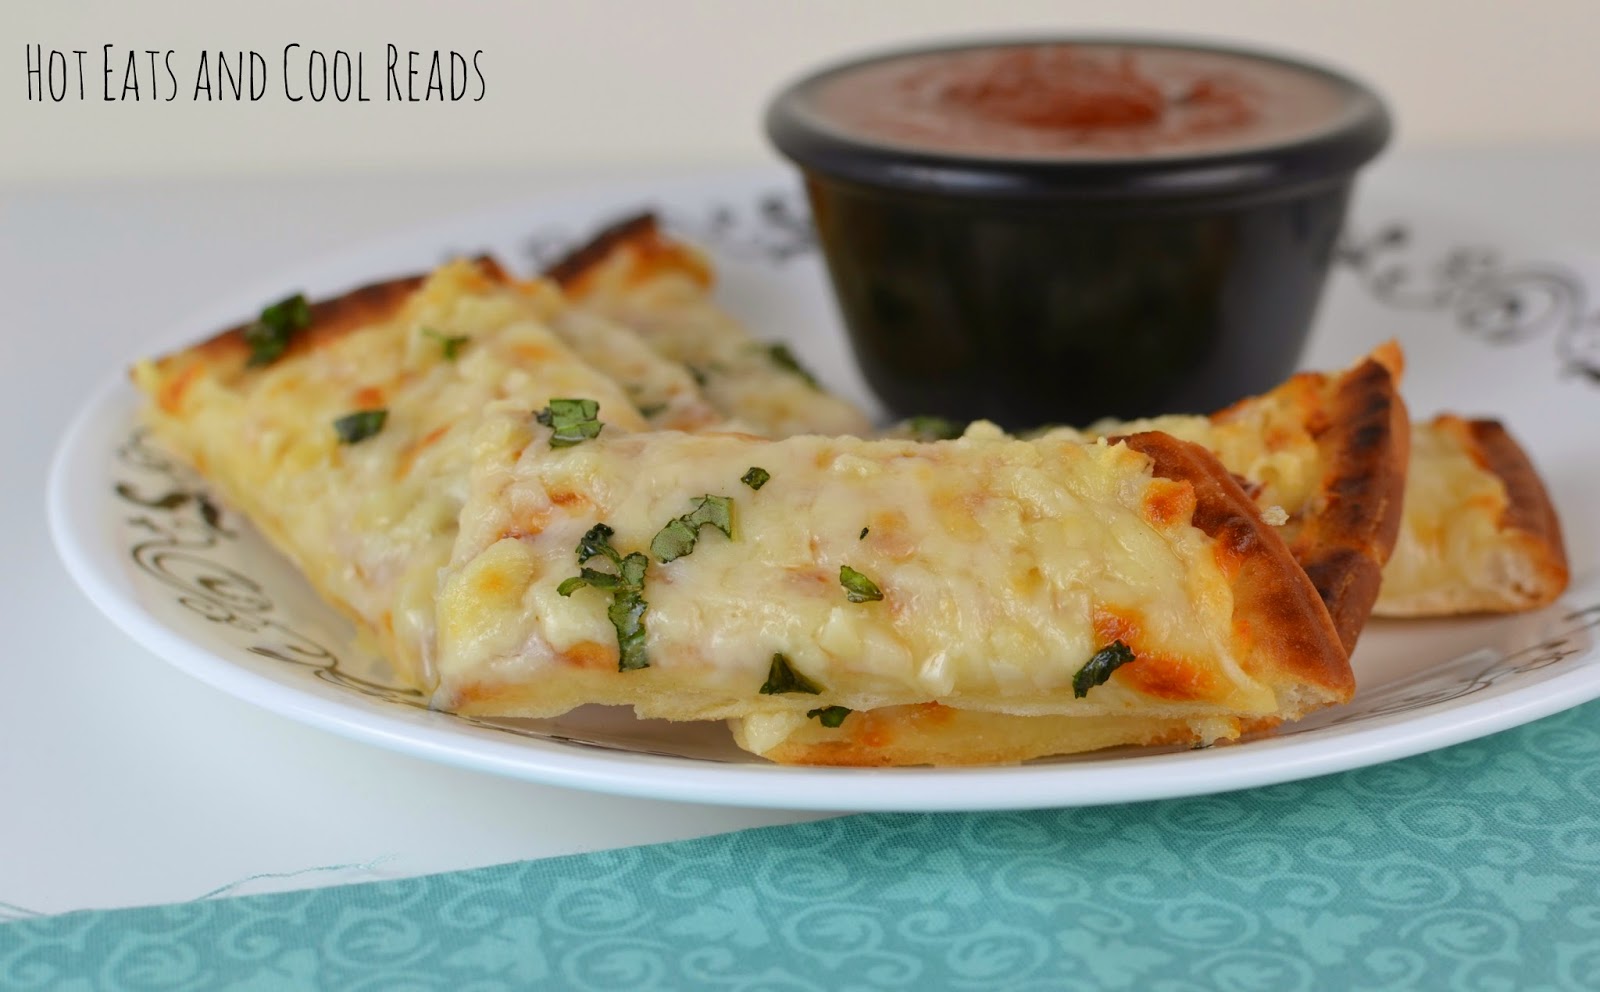 Garlicky, cheesy breadsticks that will satisfy any craving! Perfect as an appetizer or side, served with your favorite sauce! Cheesy Garlic Flatbread Breadsticks from Hot Eats and Cool Reads